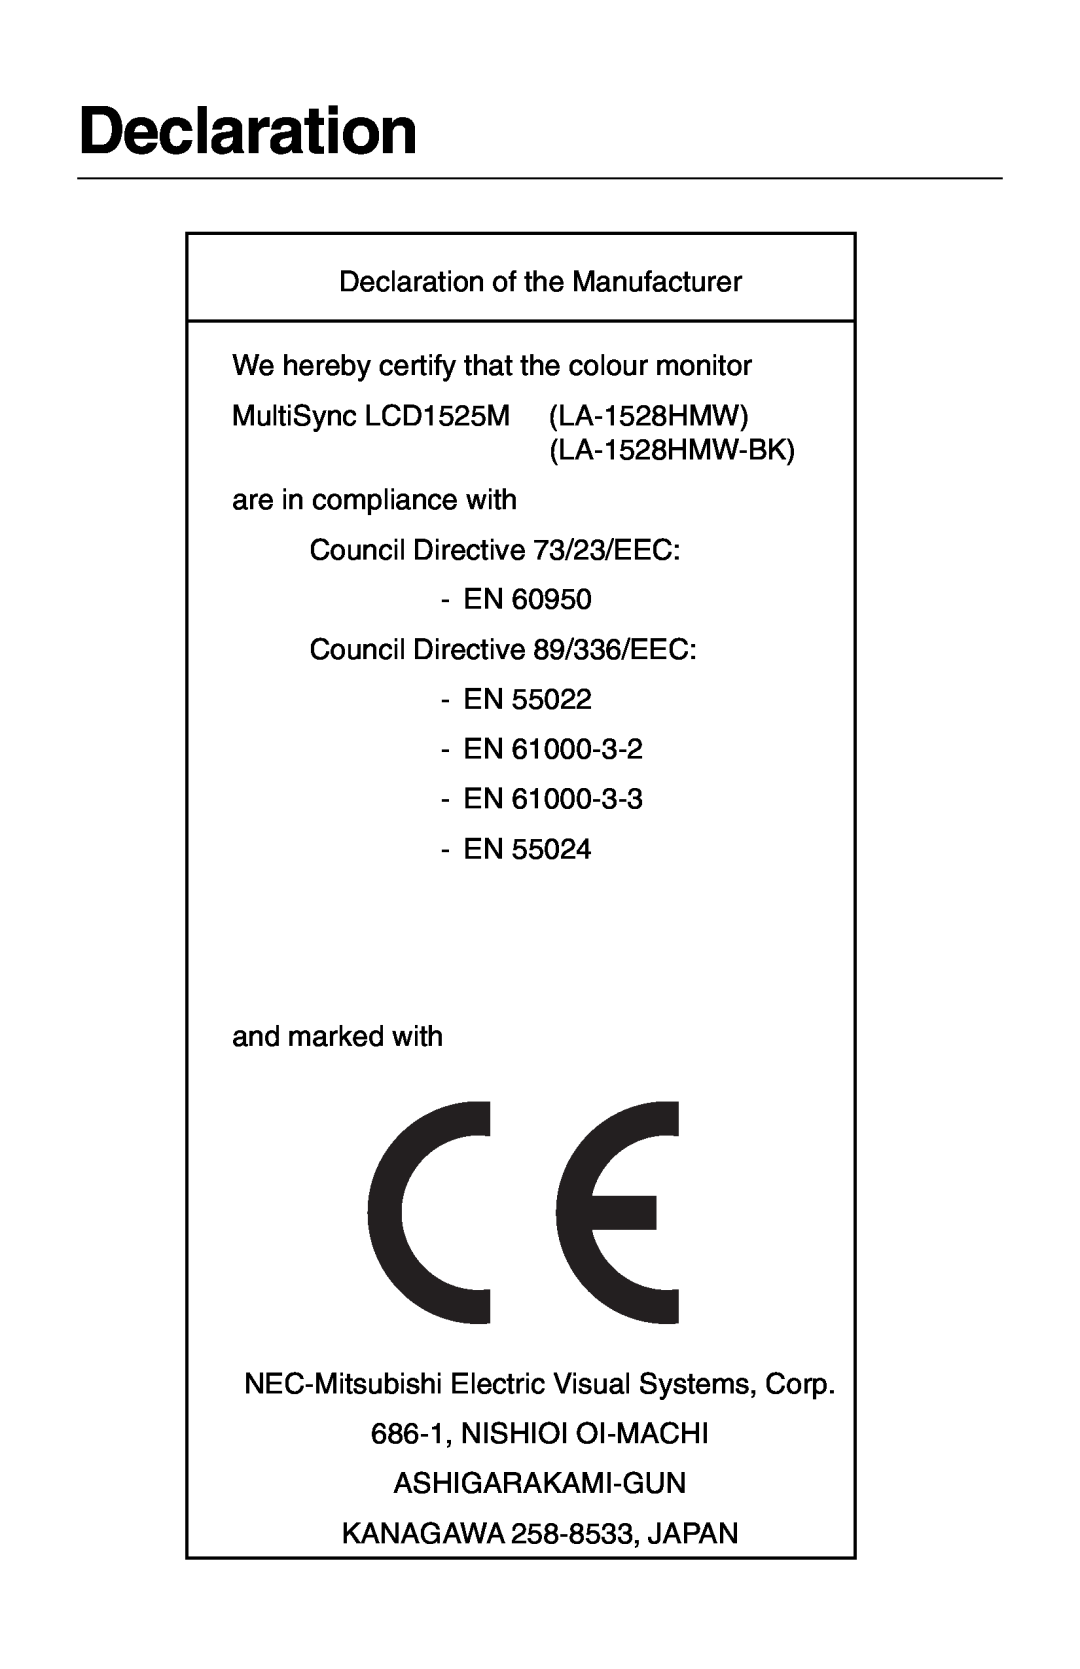 NEC 1525M manual Declaration of the Manufacturer, We hereby certify that the colour monitor 